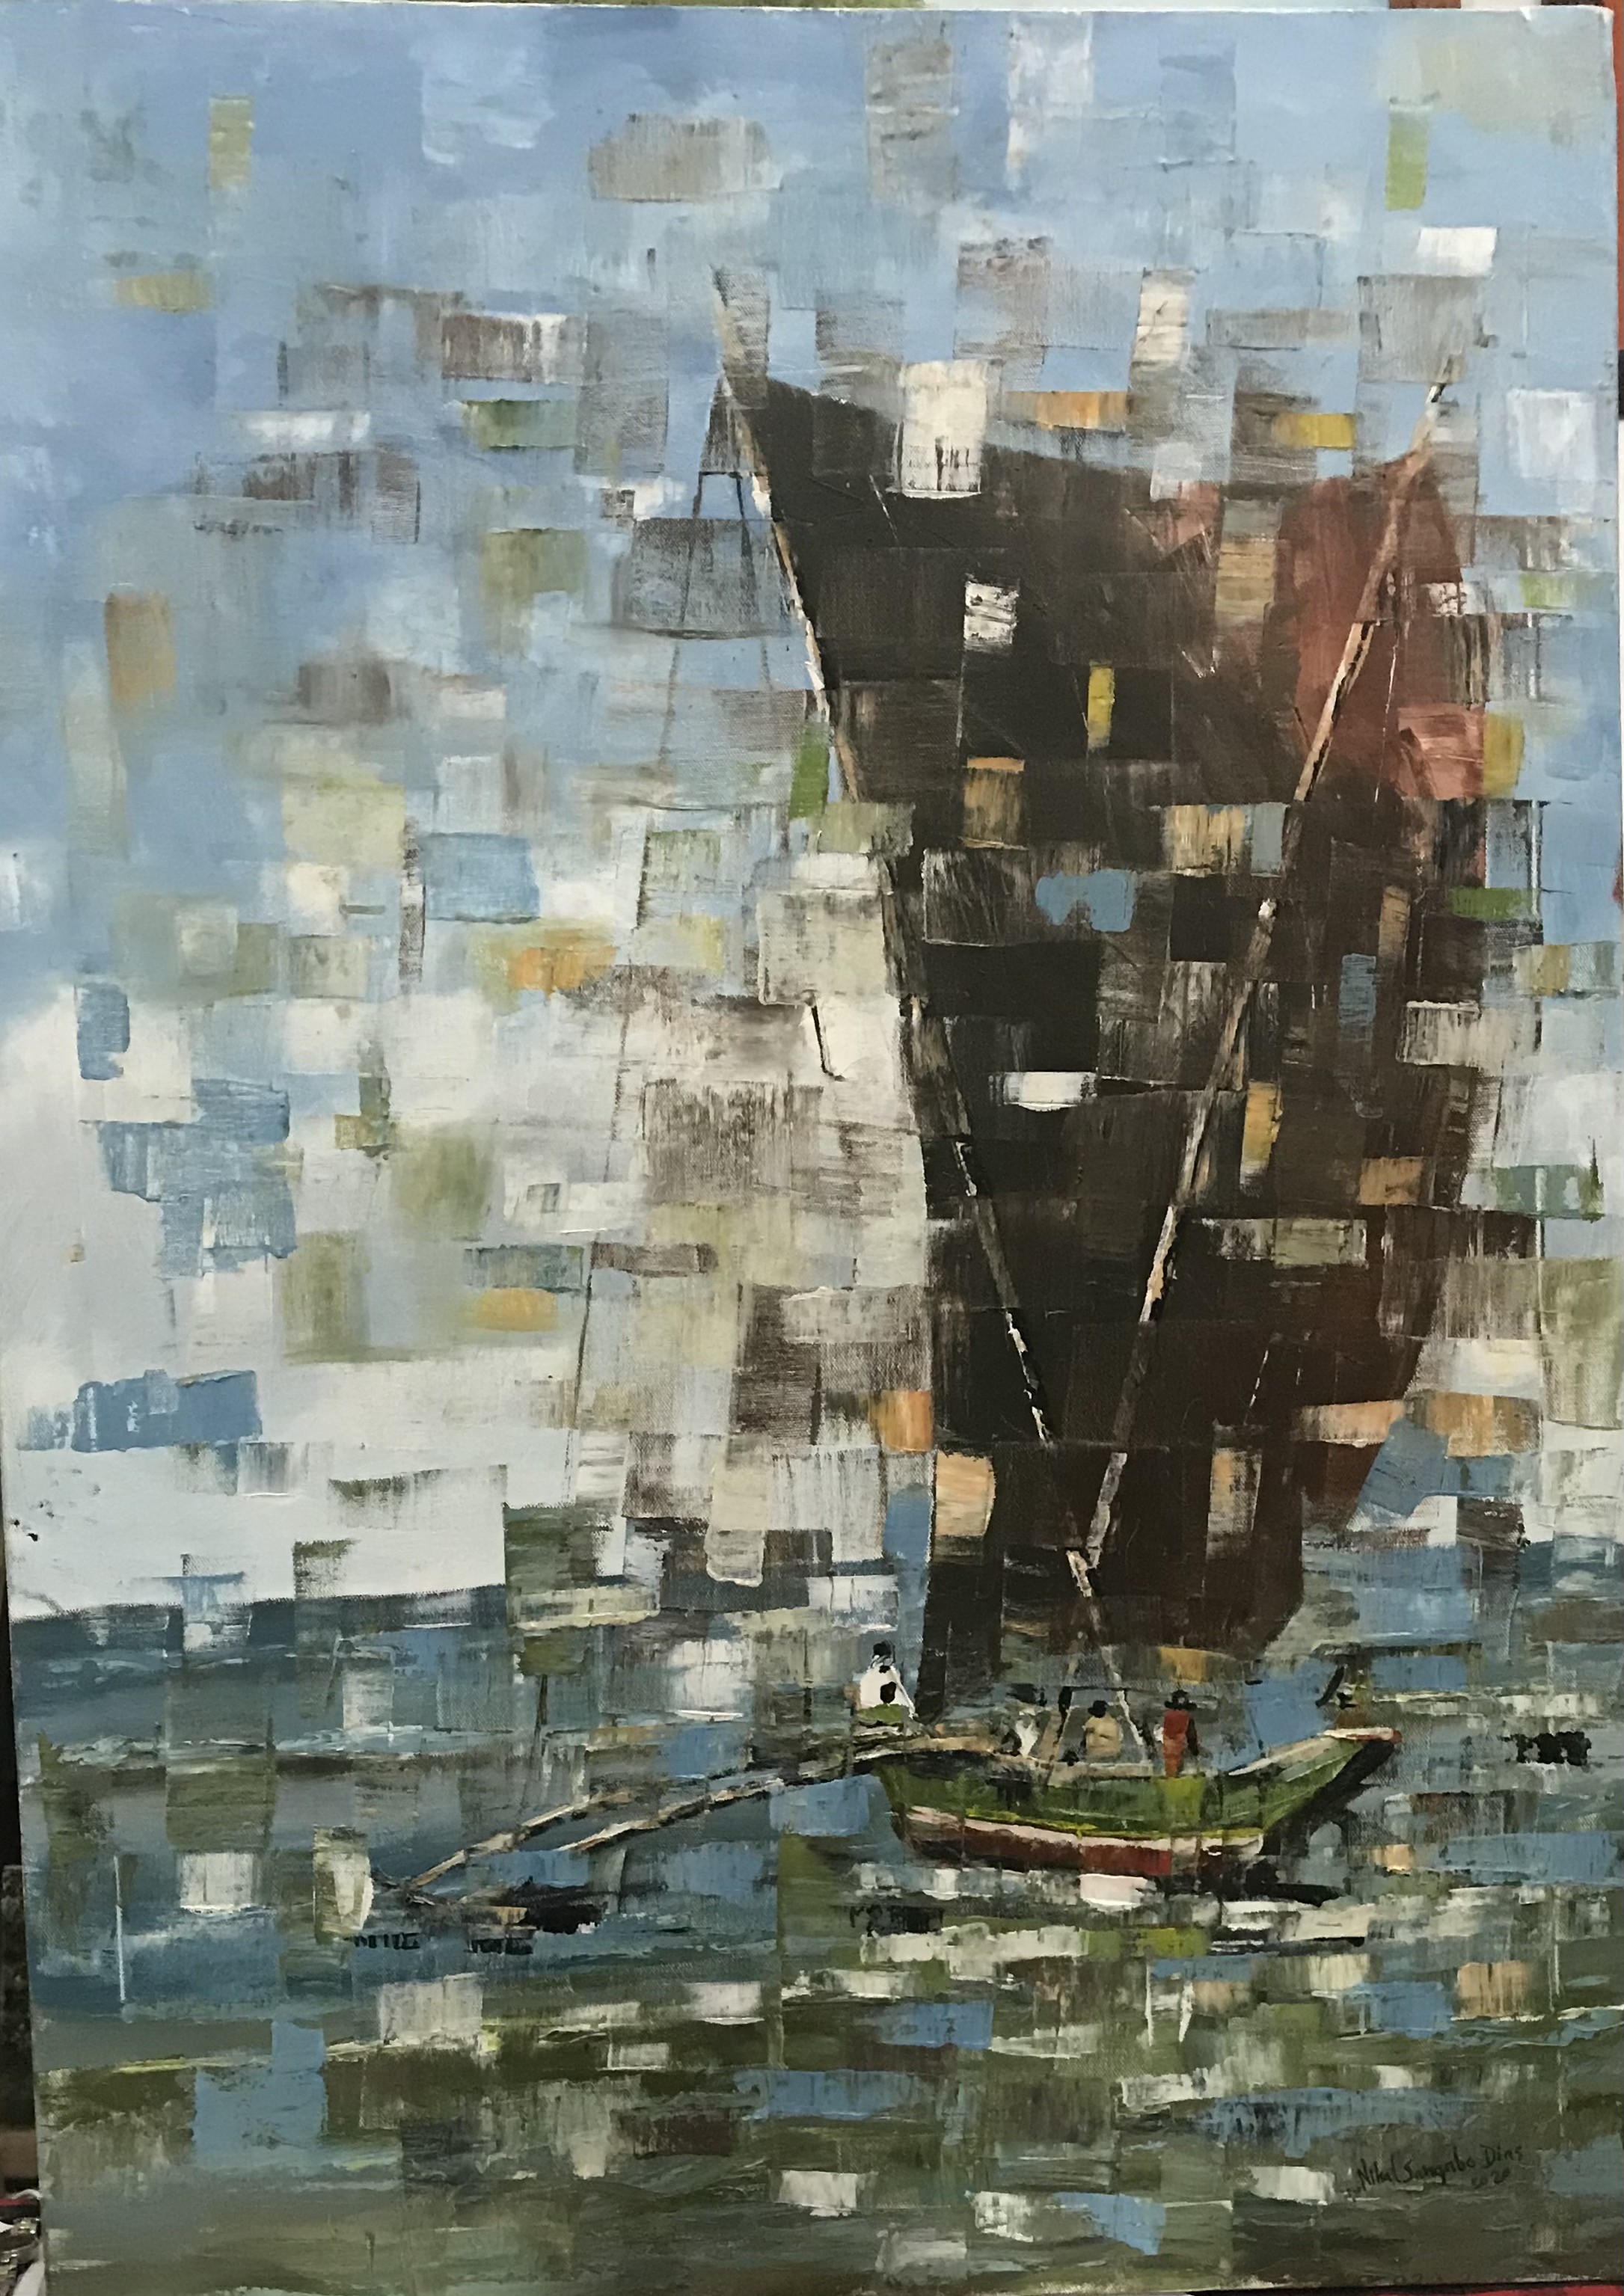 The Sailing Boat by Nihal Sangabo Dias